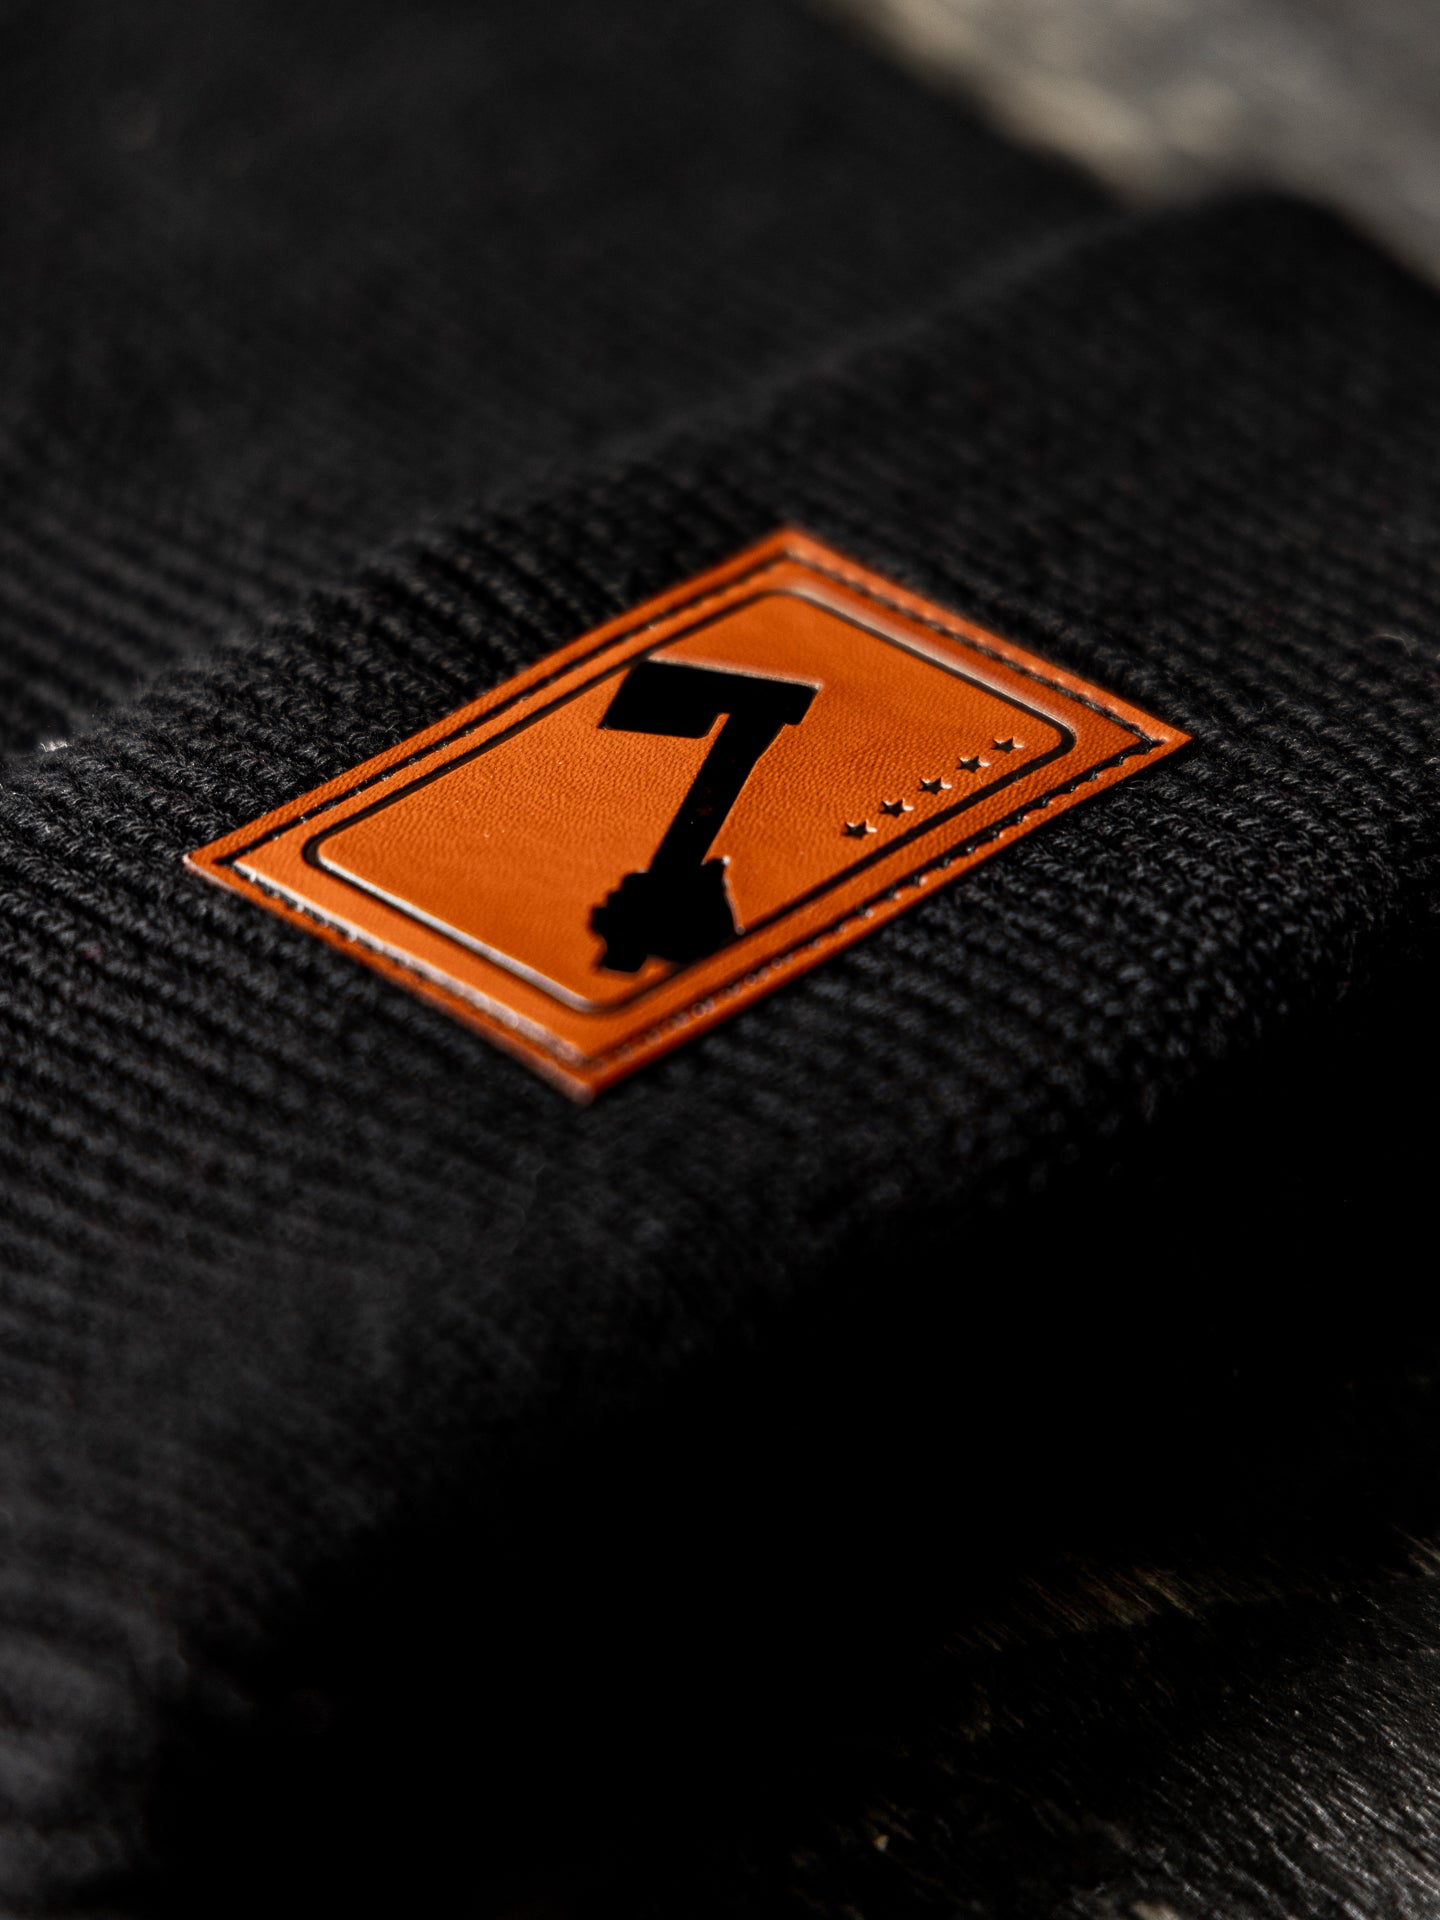 Black Beanie Hat Close-Up with Leather Patch